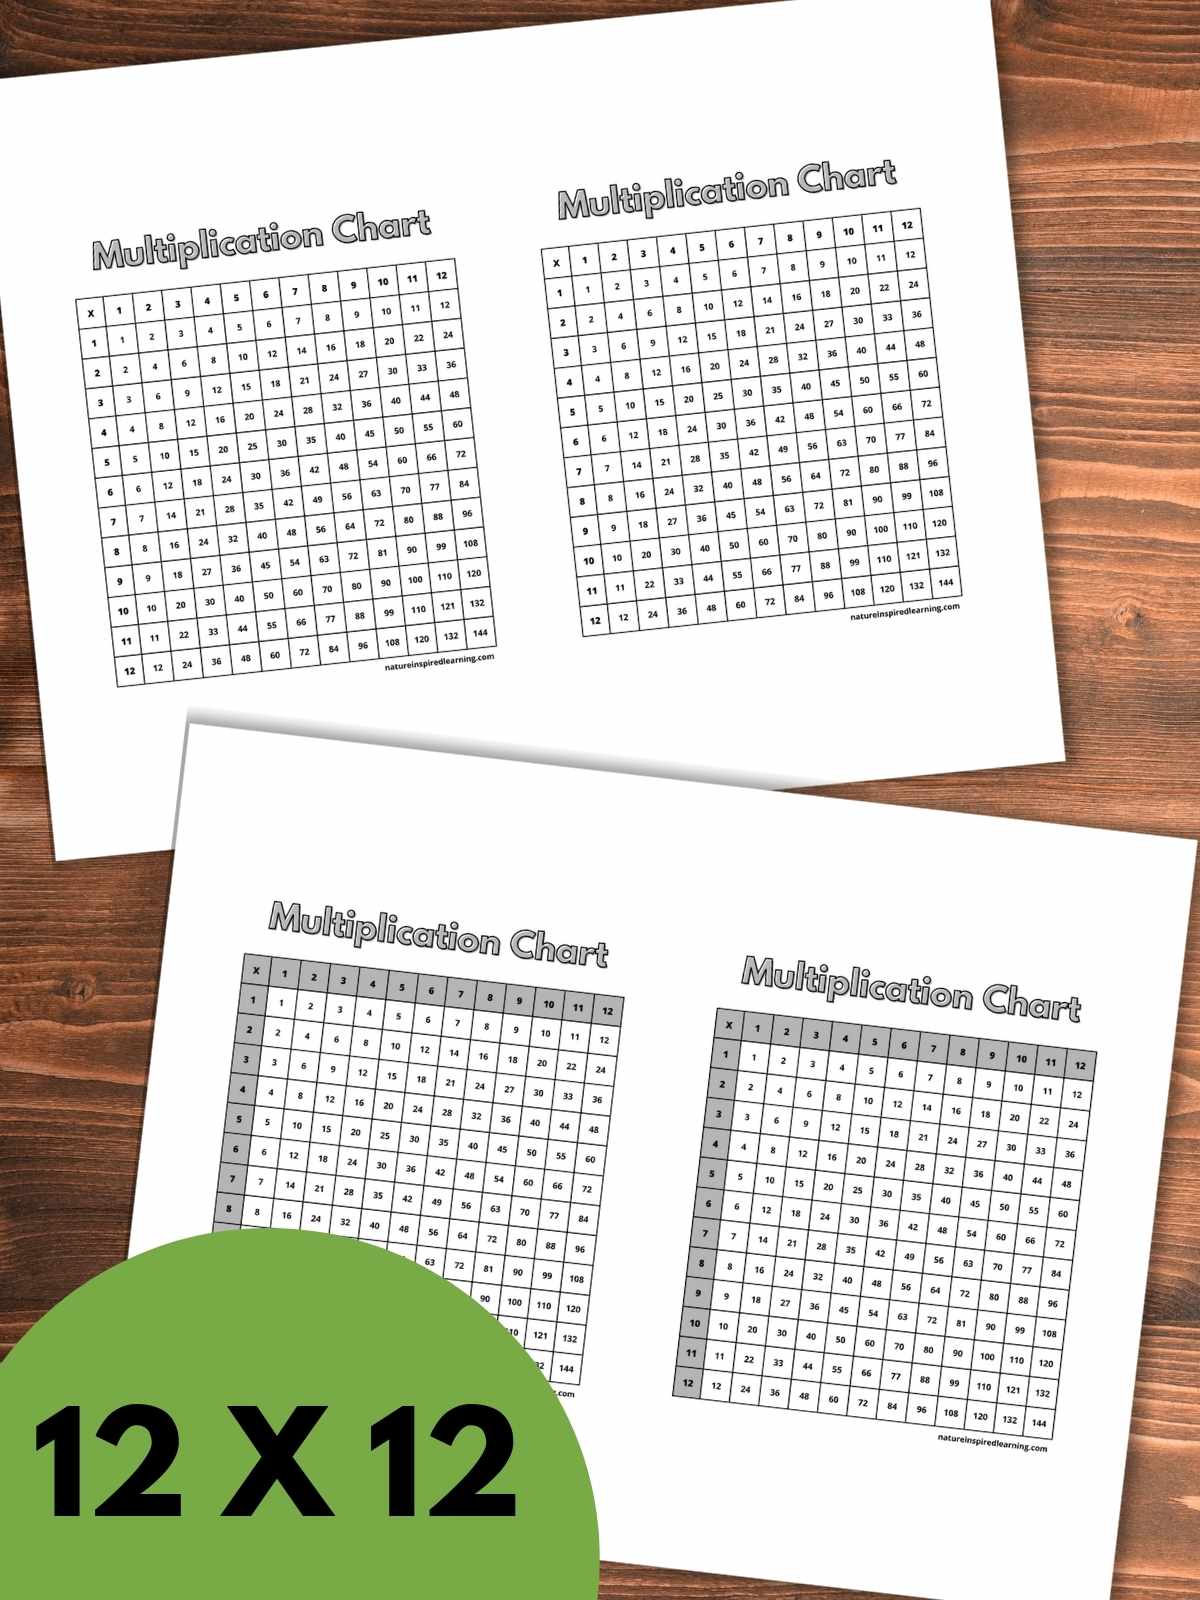 Two printables with two 12 by 12 multiplication grids on each overlapping on a wooden background. Green half circle with text overlay bottom left corner